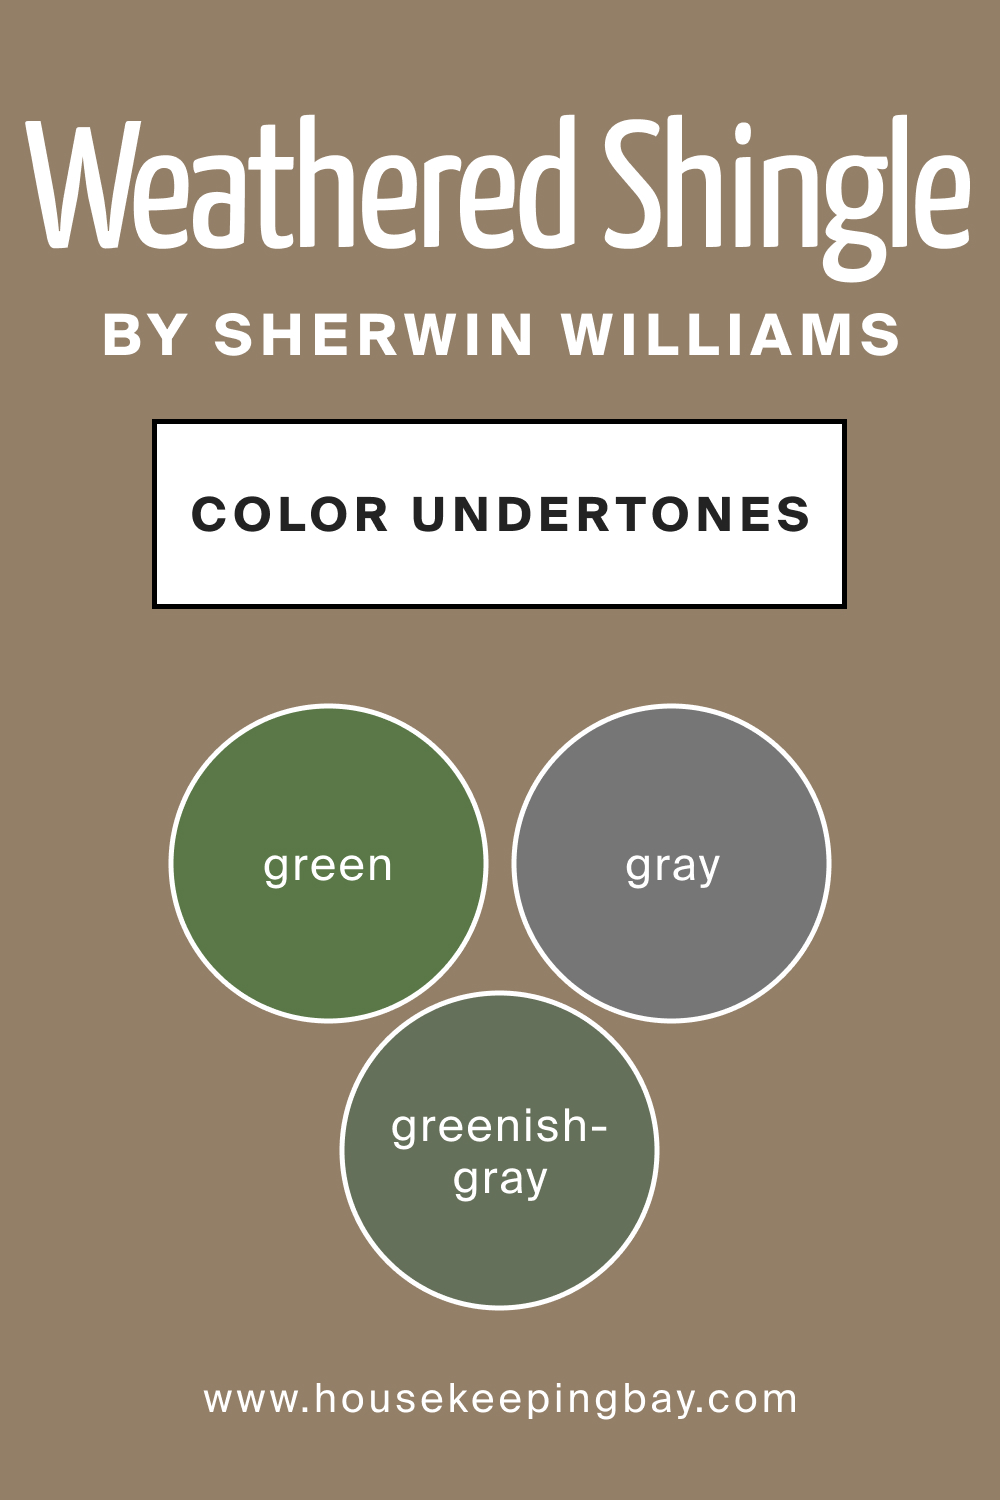 SW 2841 Weathered Shingle by Sherwin Williams Color Undertone